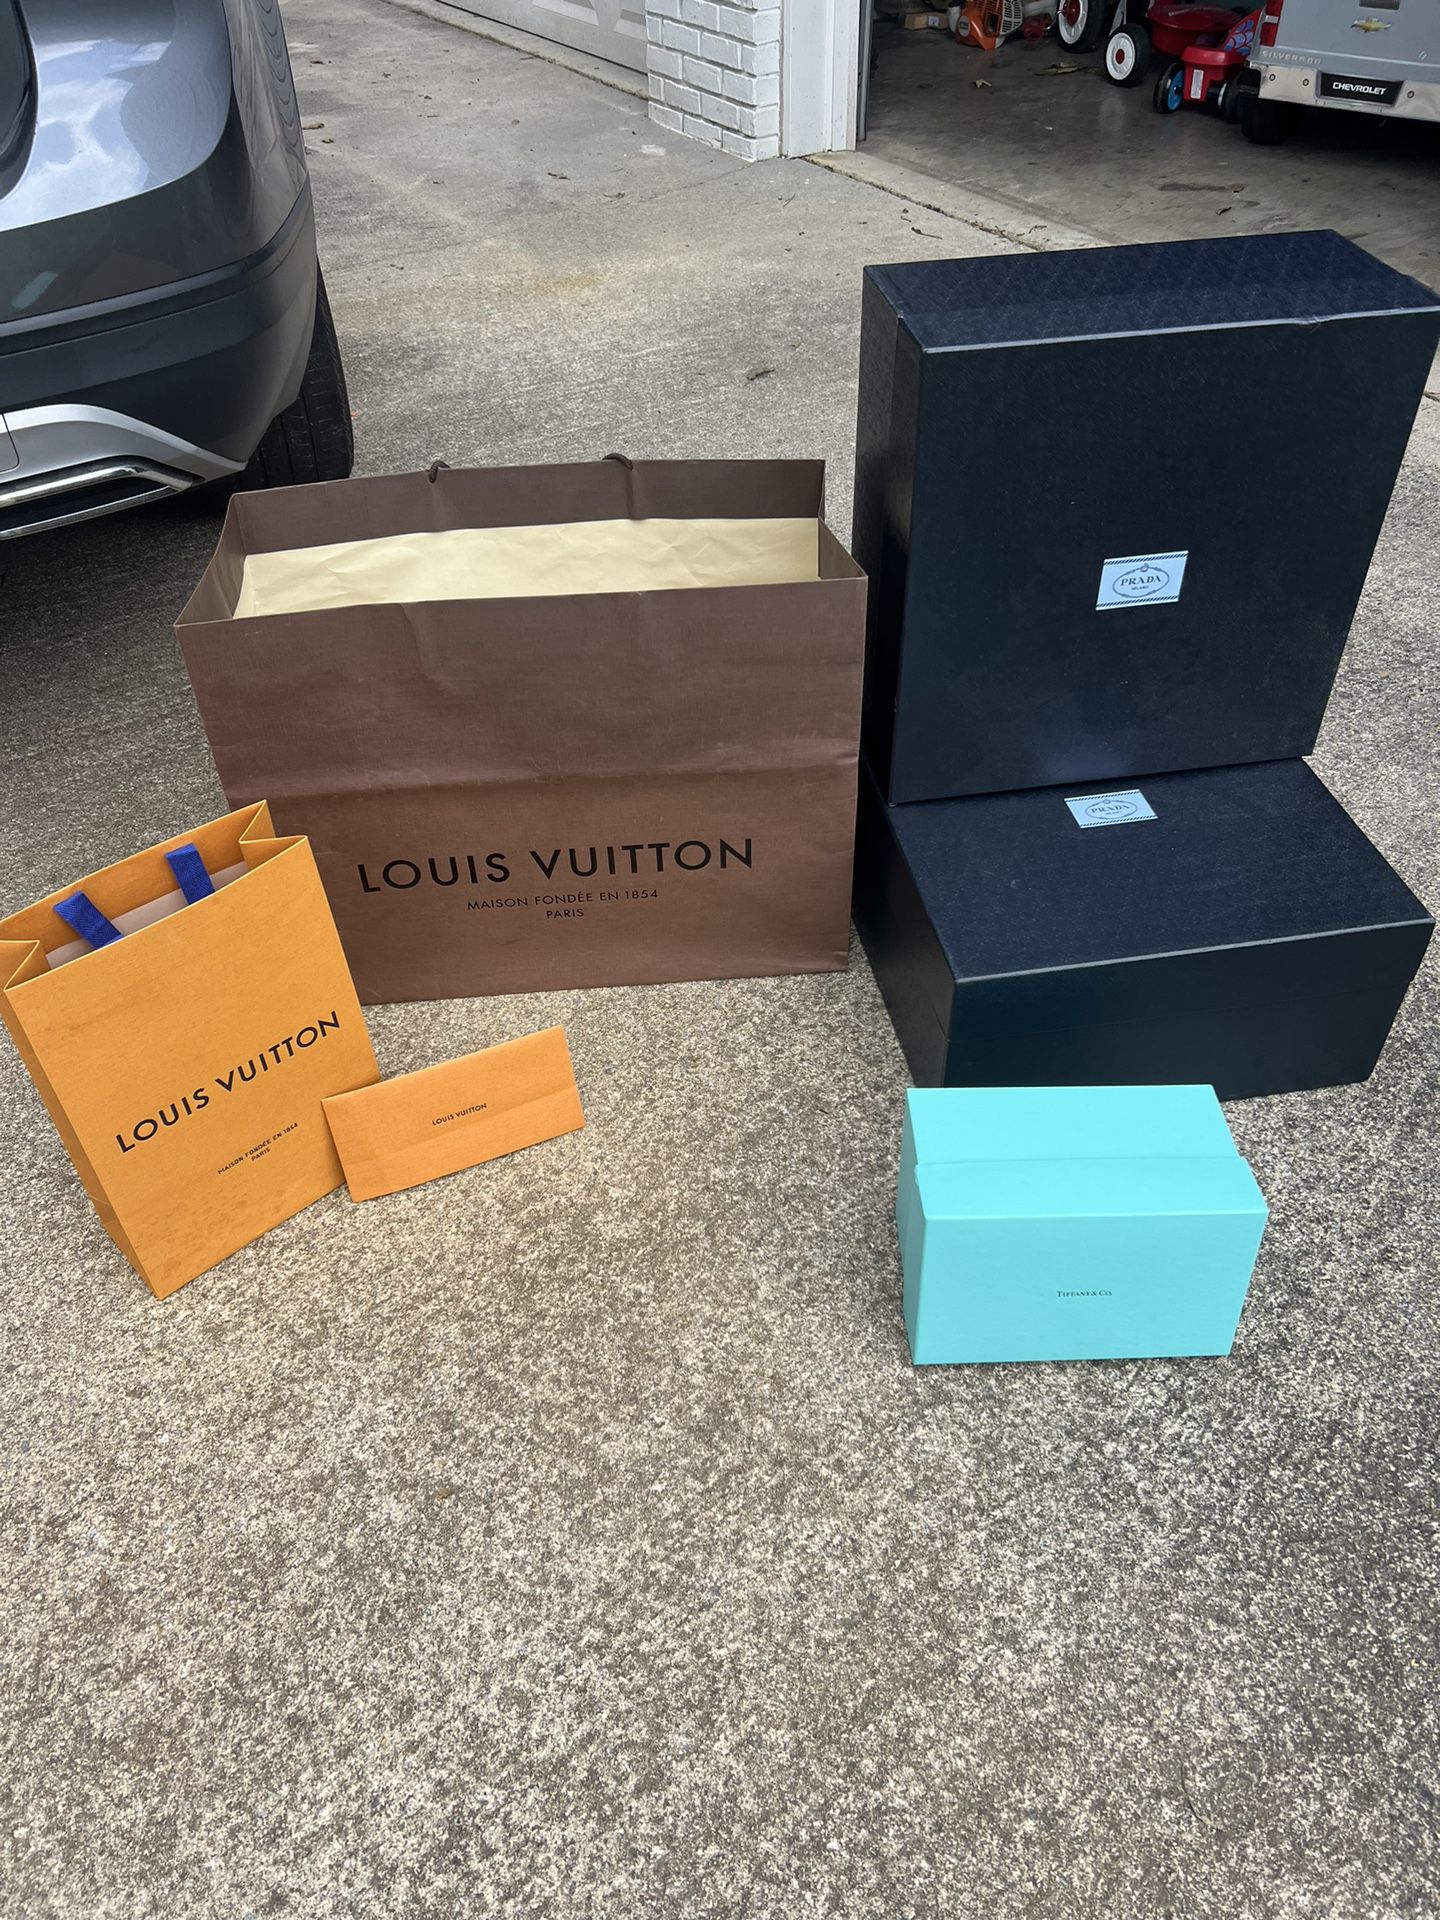 Louis Vuitton Gift Box and Gift Bag